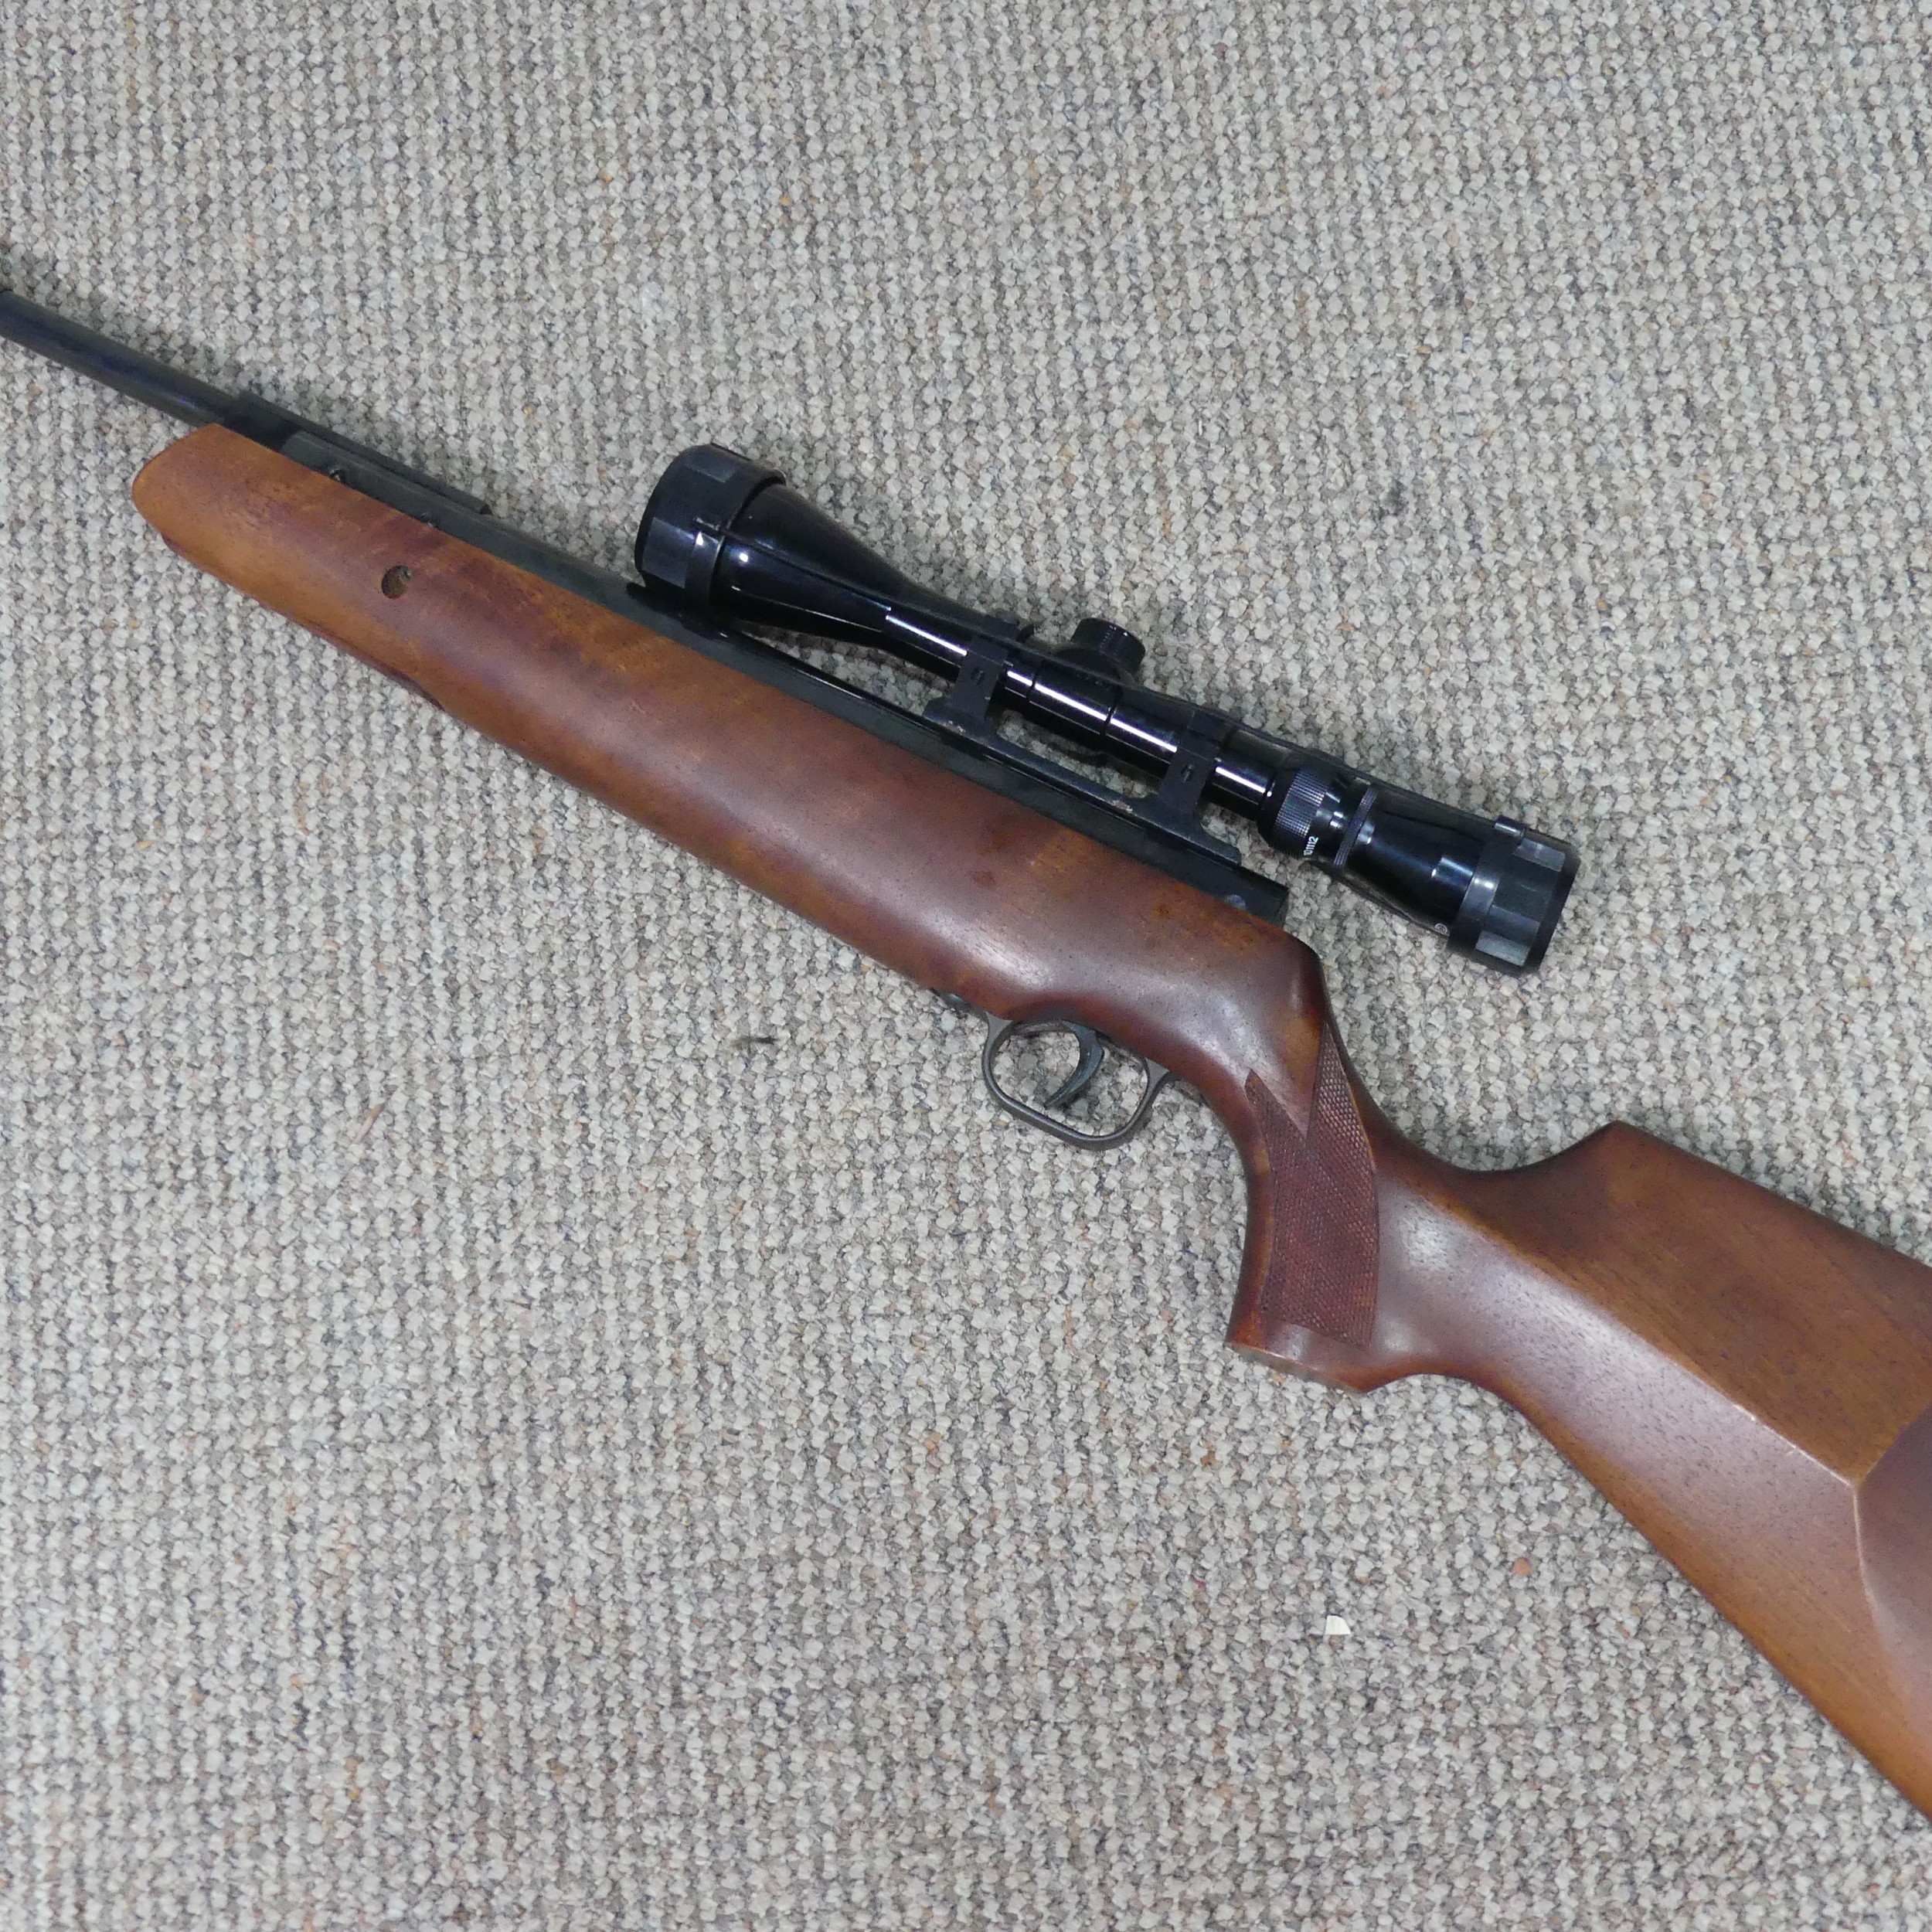 A Theoben H-E .22 CAL Air Rifle, complete with Tasco scope (3-12x40). - Image 2 of 5